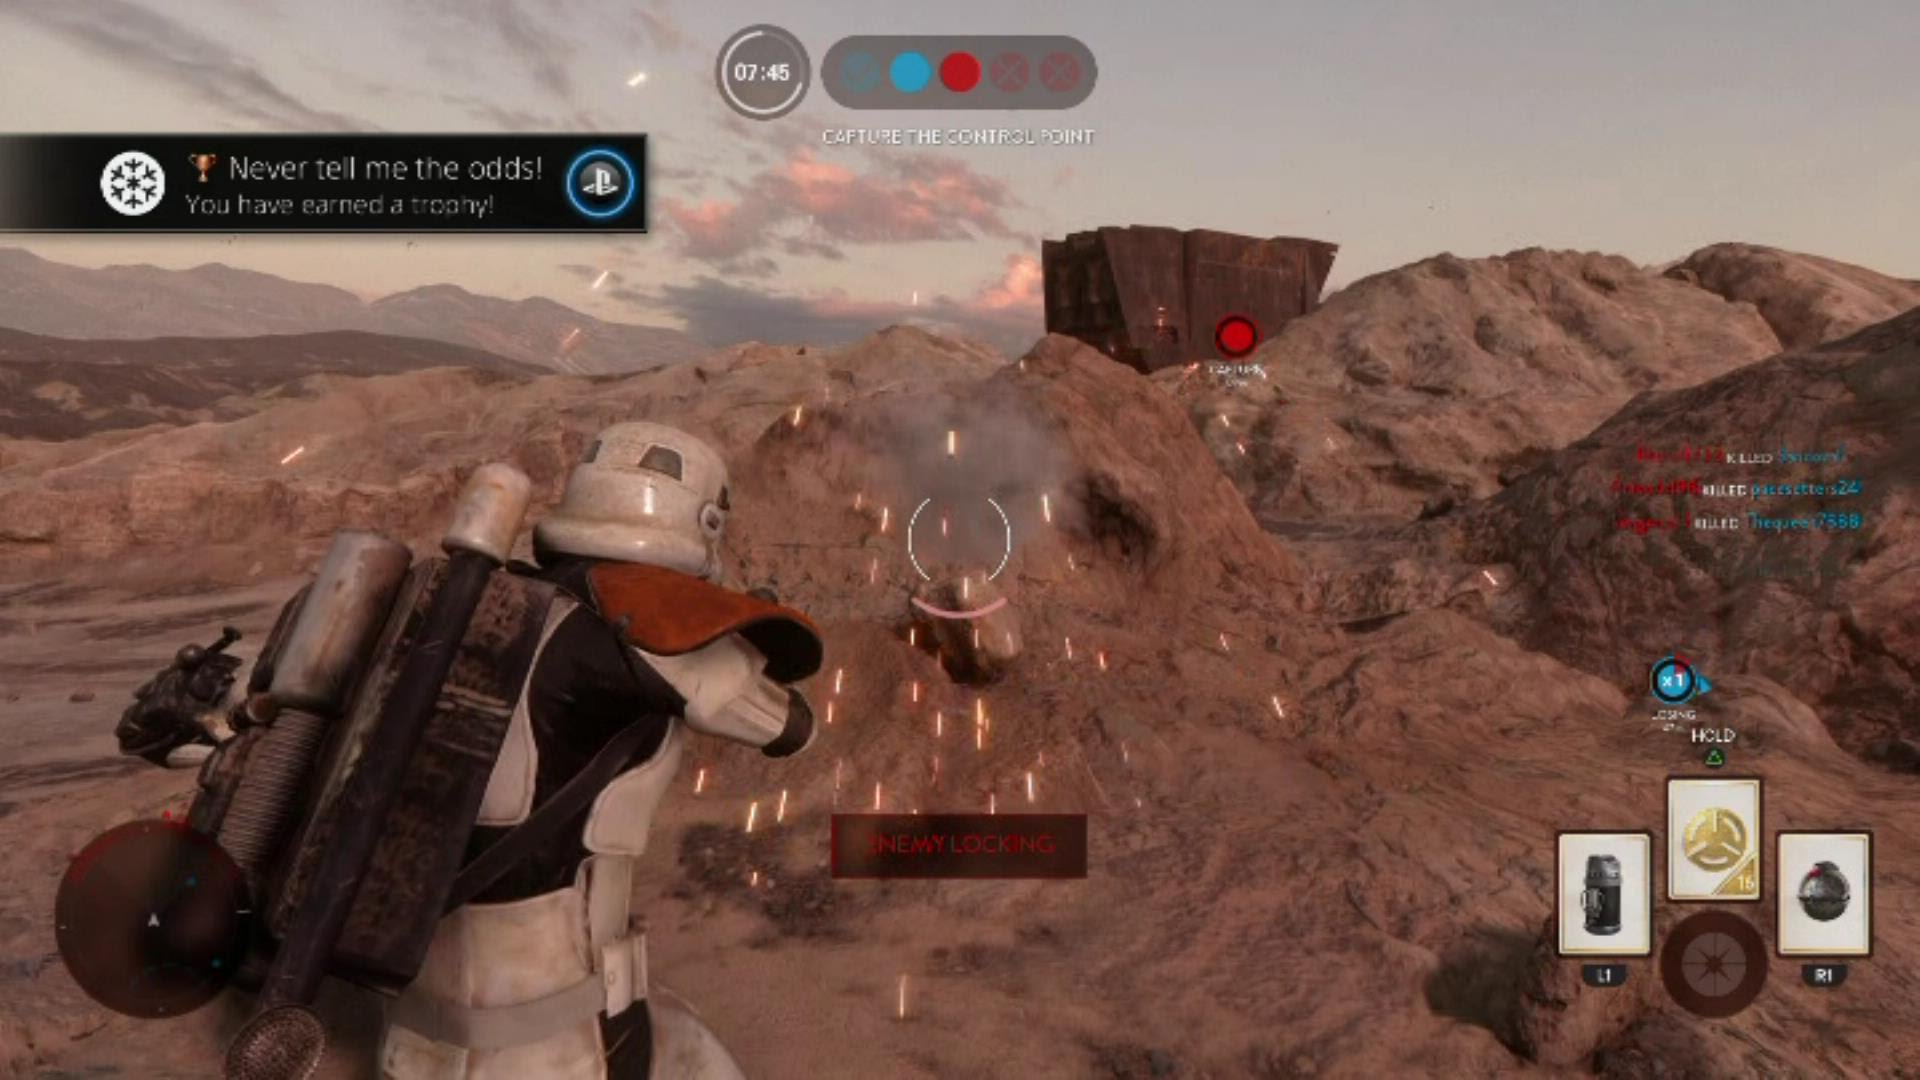 Star Wars Battlefront: “Never Tell Me The Odds!” Trophy/Achievement – HTG